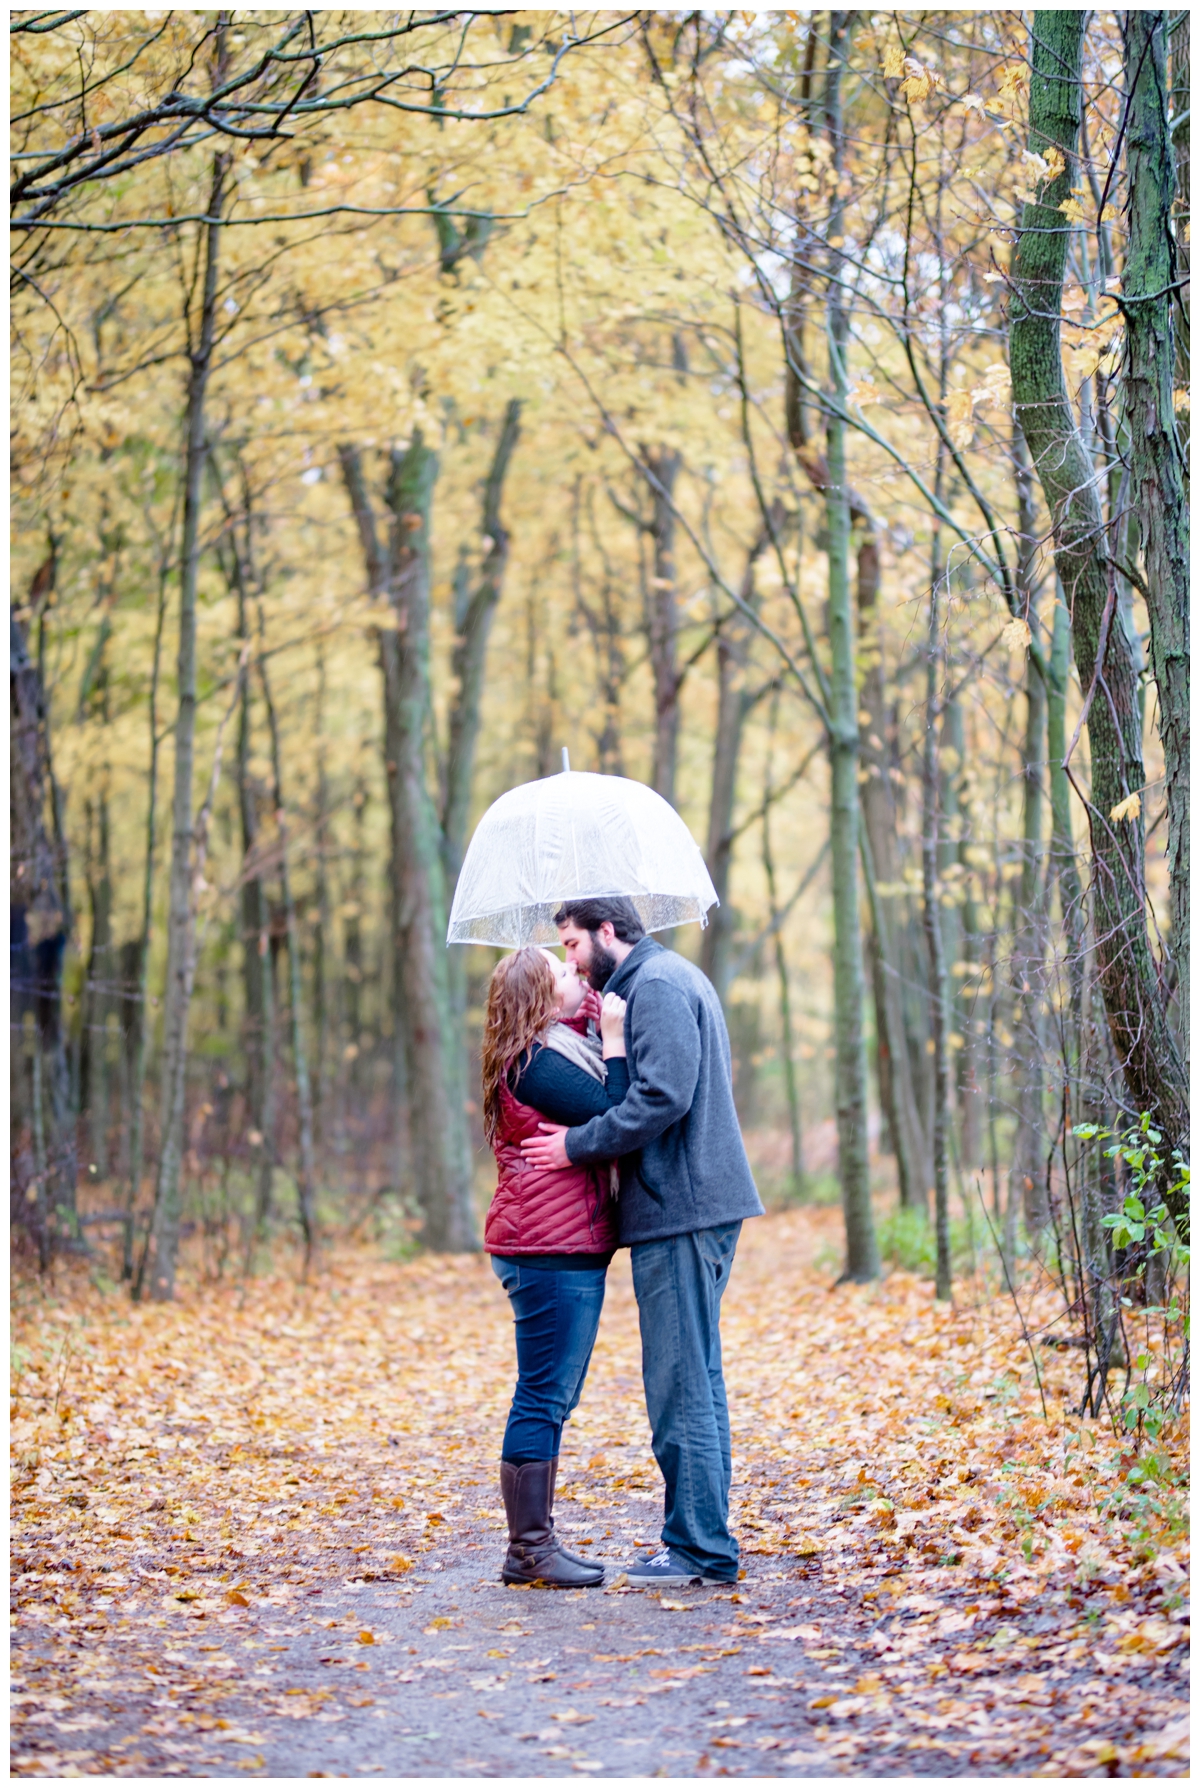 Amy Andrew Engagement Session High Cliff State Park Meghan Lee Harris Wisconsin Wedding Photographer Photography Woodsy Forest Beach Lakeside Rainy Romance Romantic